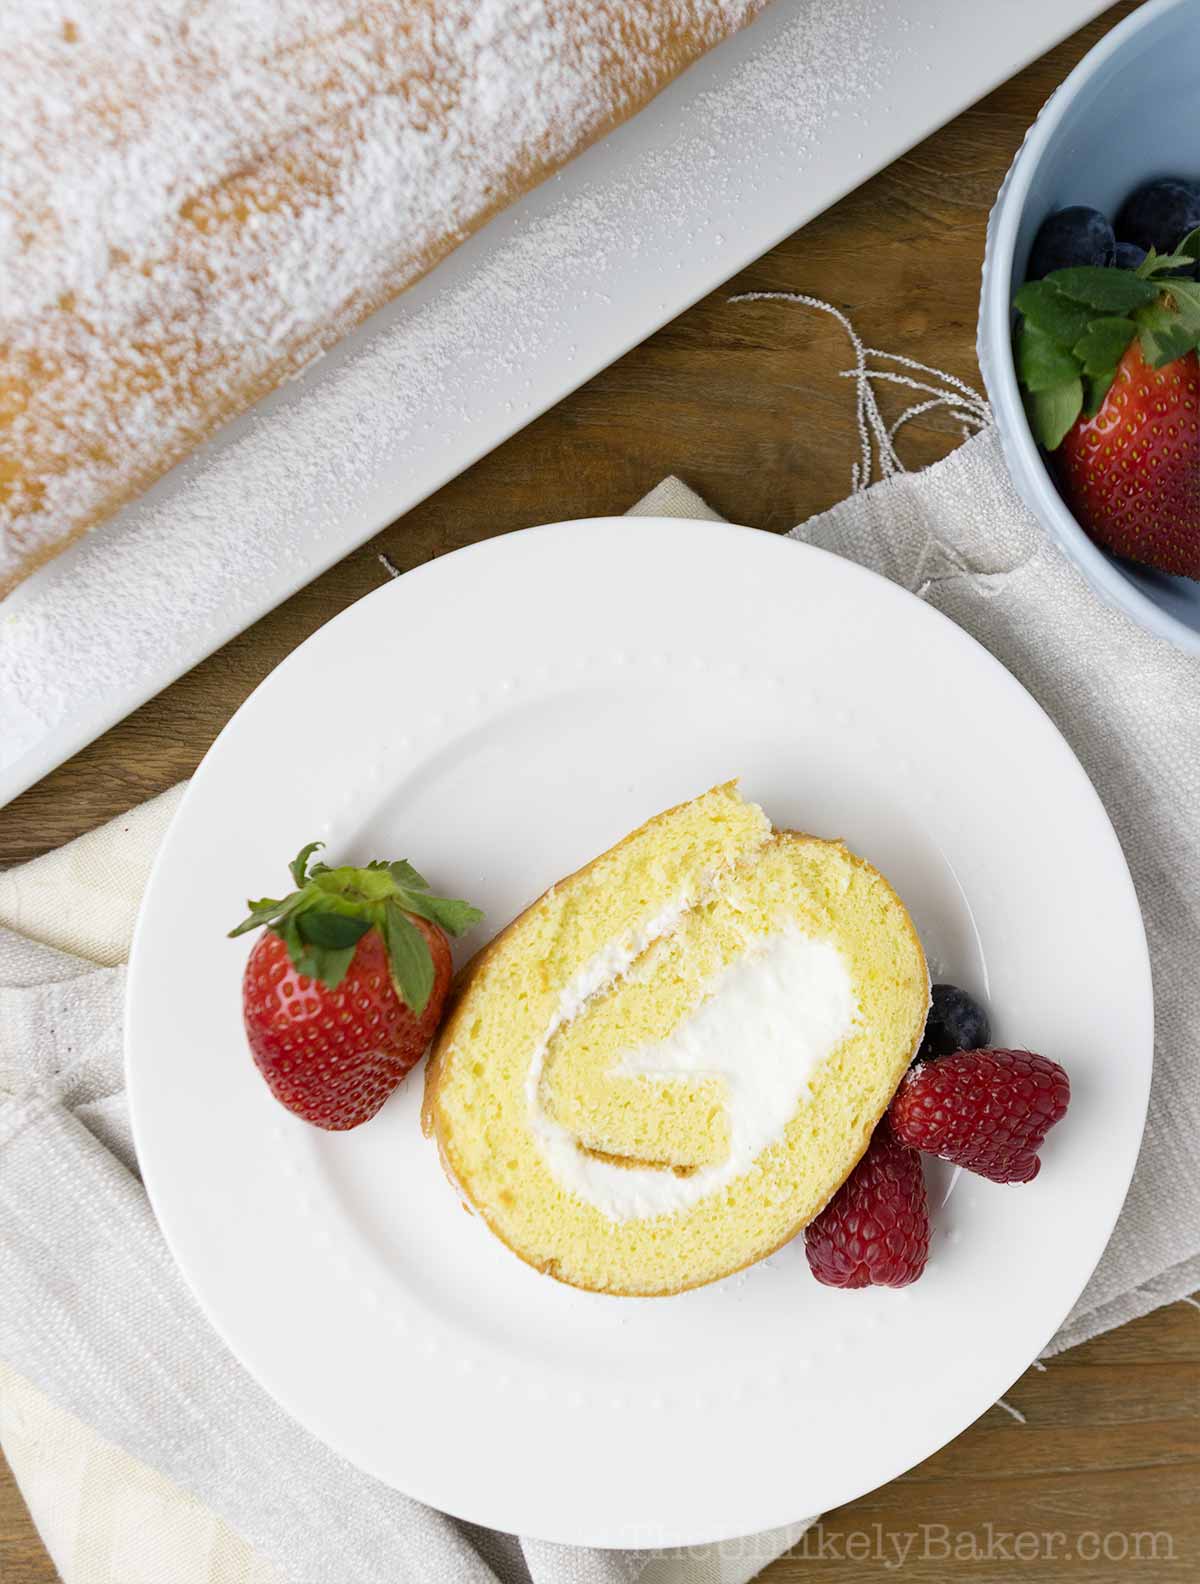 Slice of vanilla roll cake with whipped cream filling.